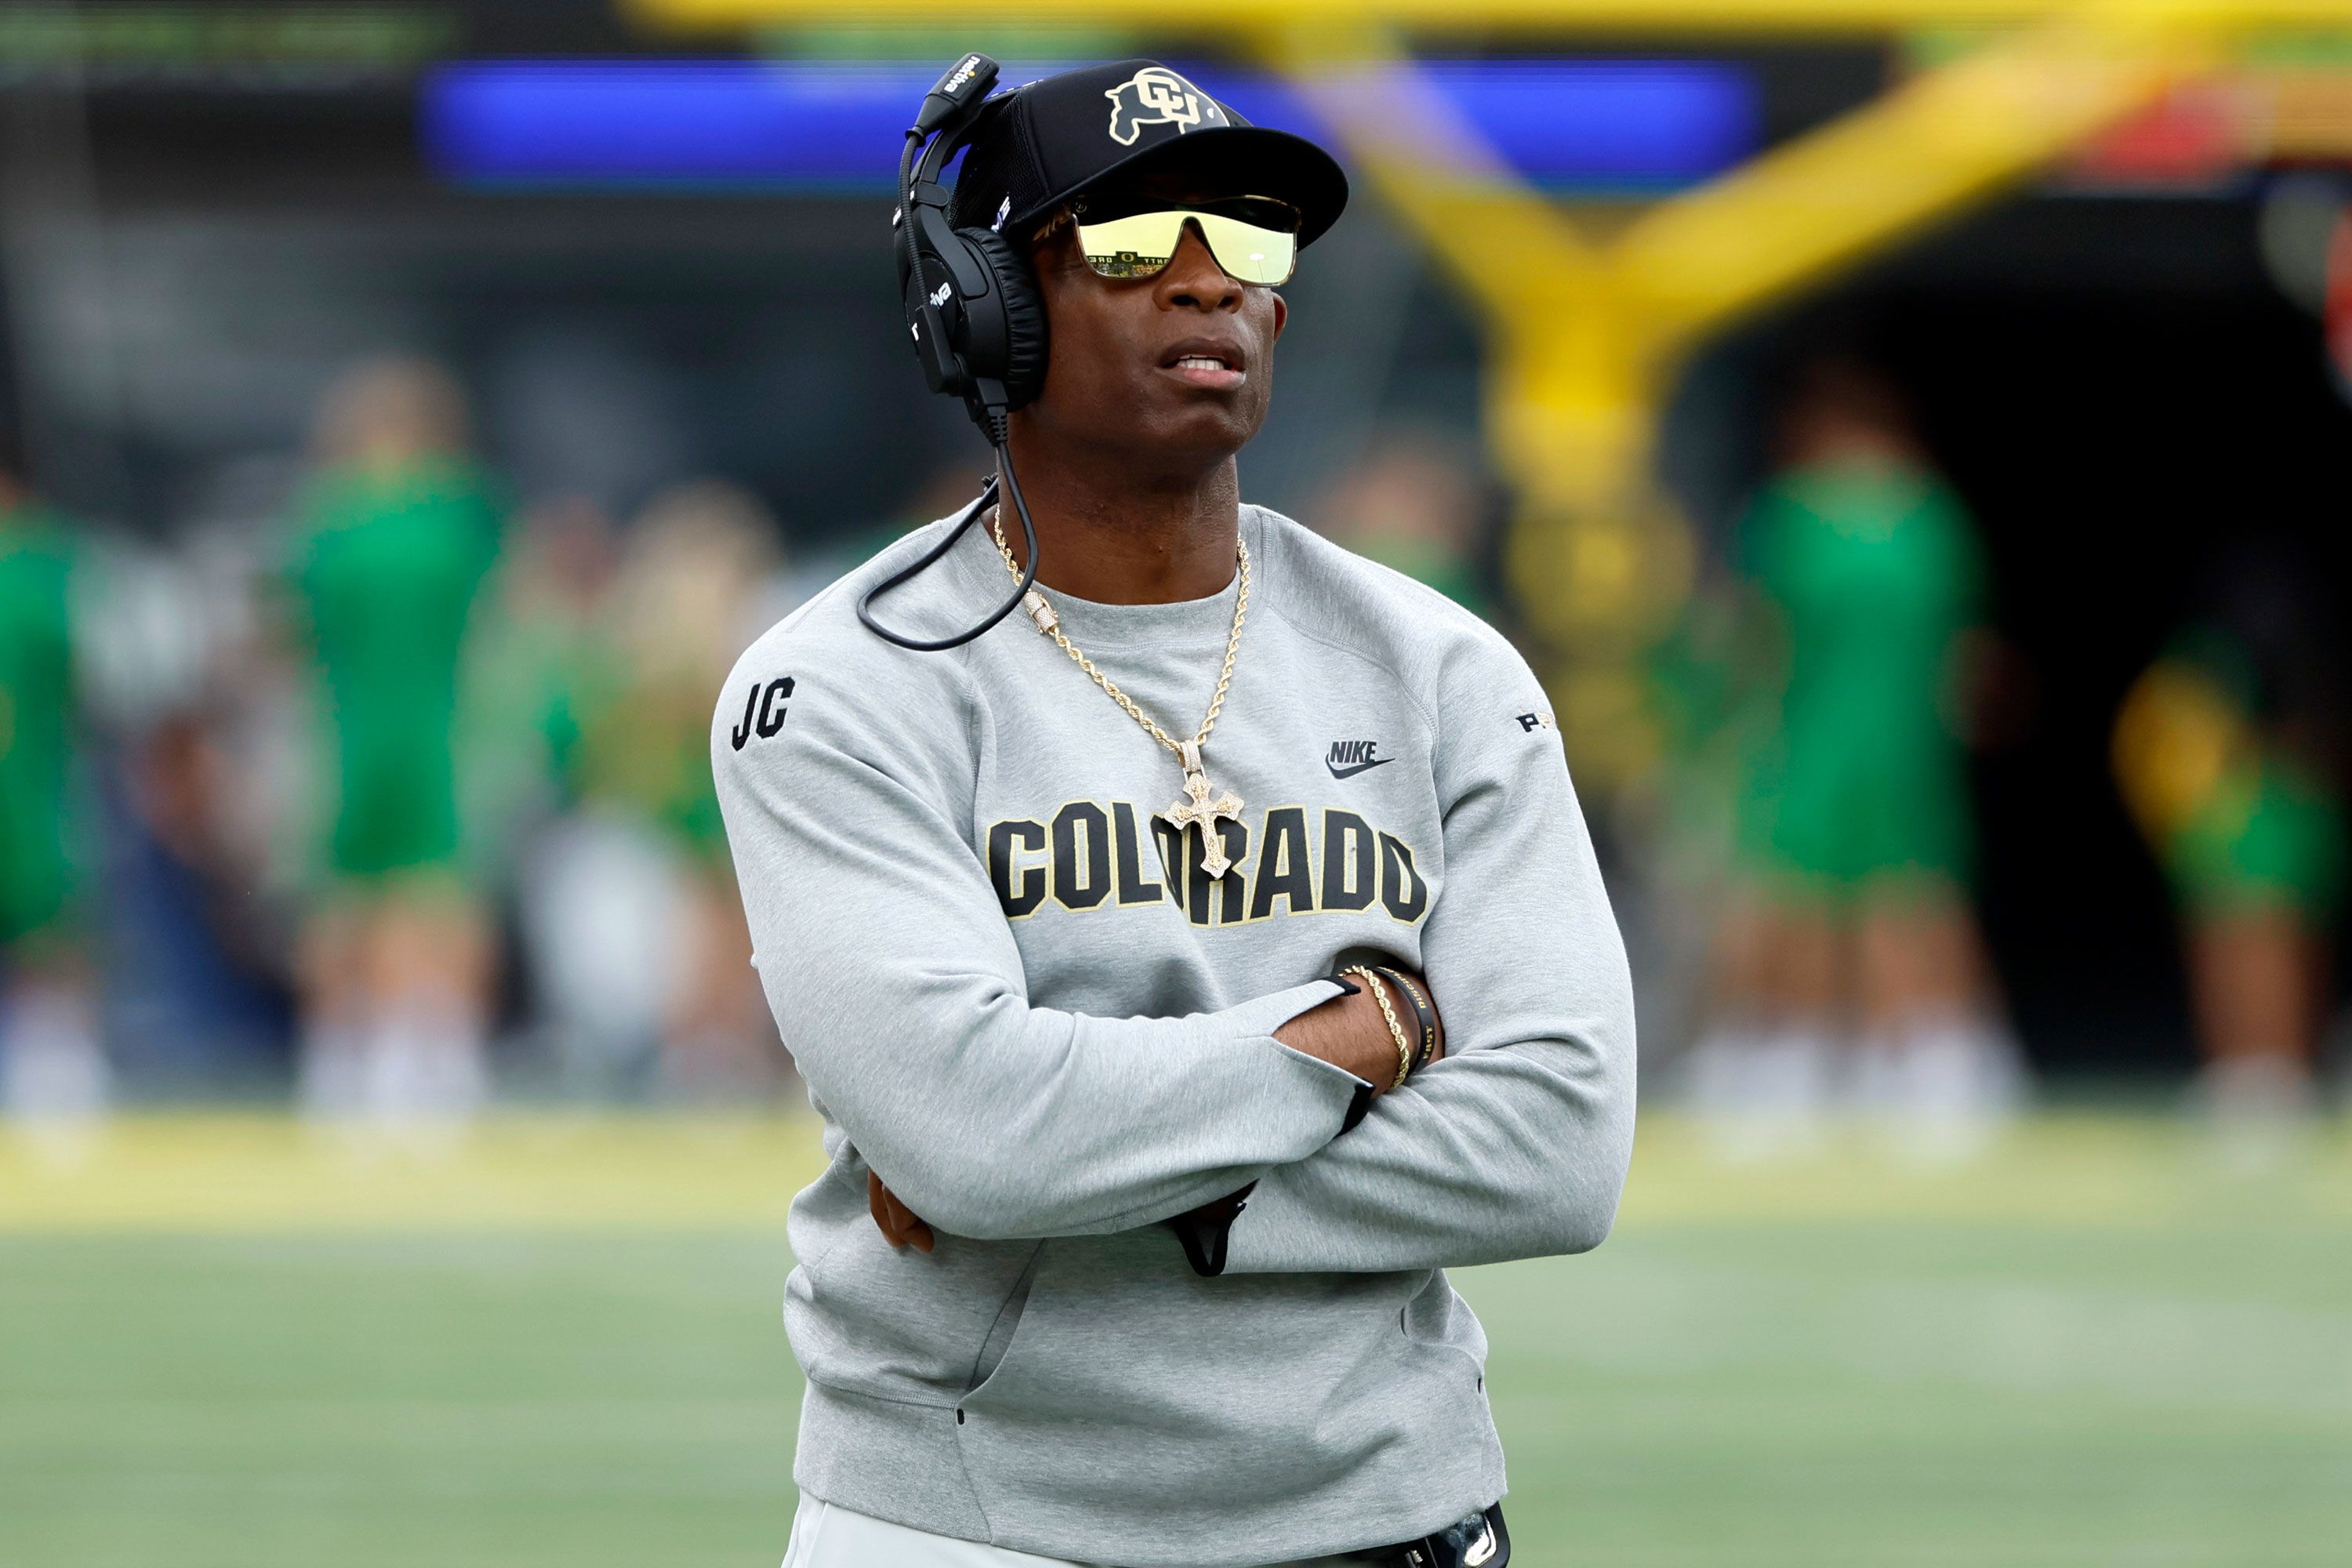 Analysis: Critics who tell Deion Sanders to shut up and coach are